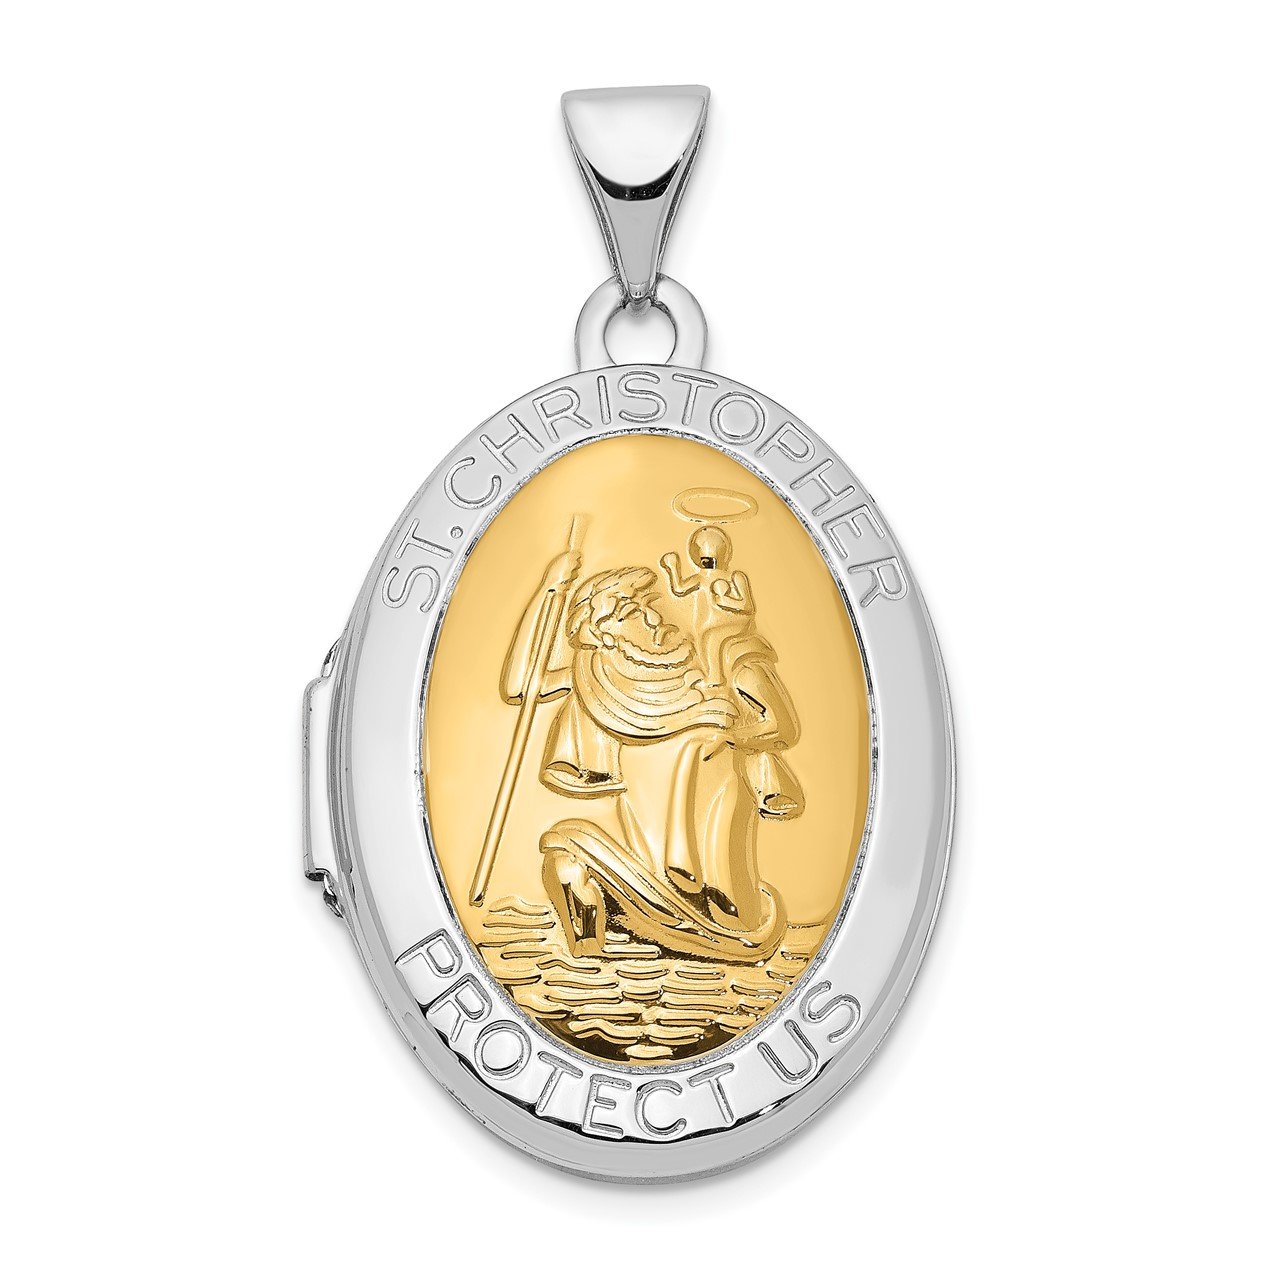 14K White Gold with Yellow Gold accent 23mm Saint Christopher Locket Pendan